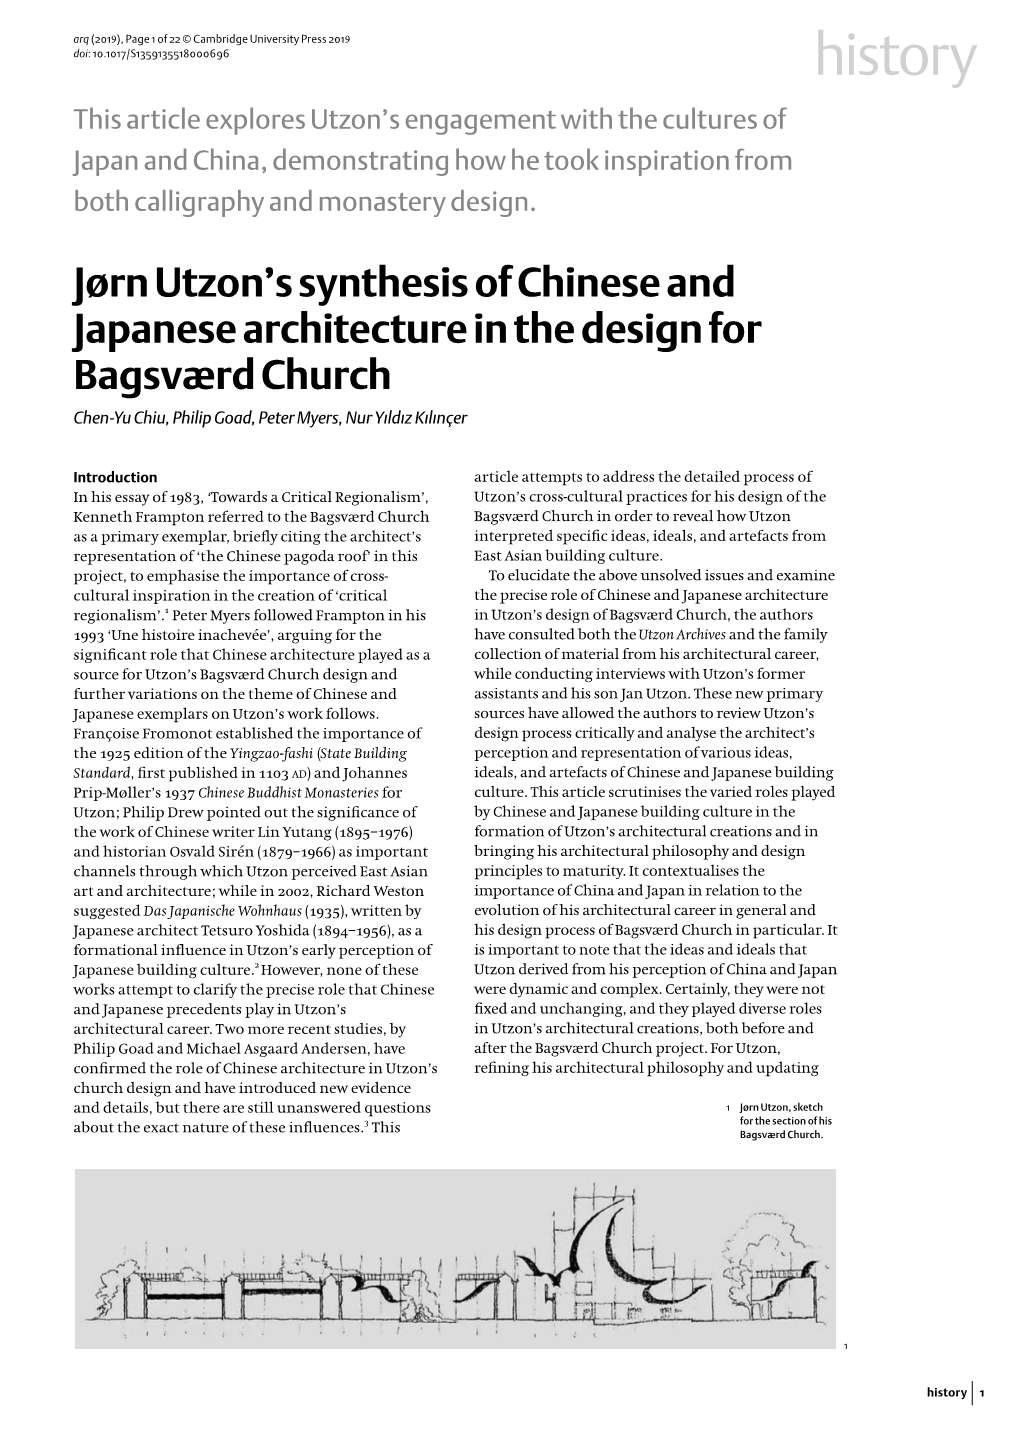 Jørn Utzon's Synthesis of Chinese and Japanese Architecture in the Design for Bagsværd Church